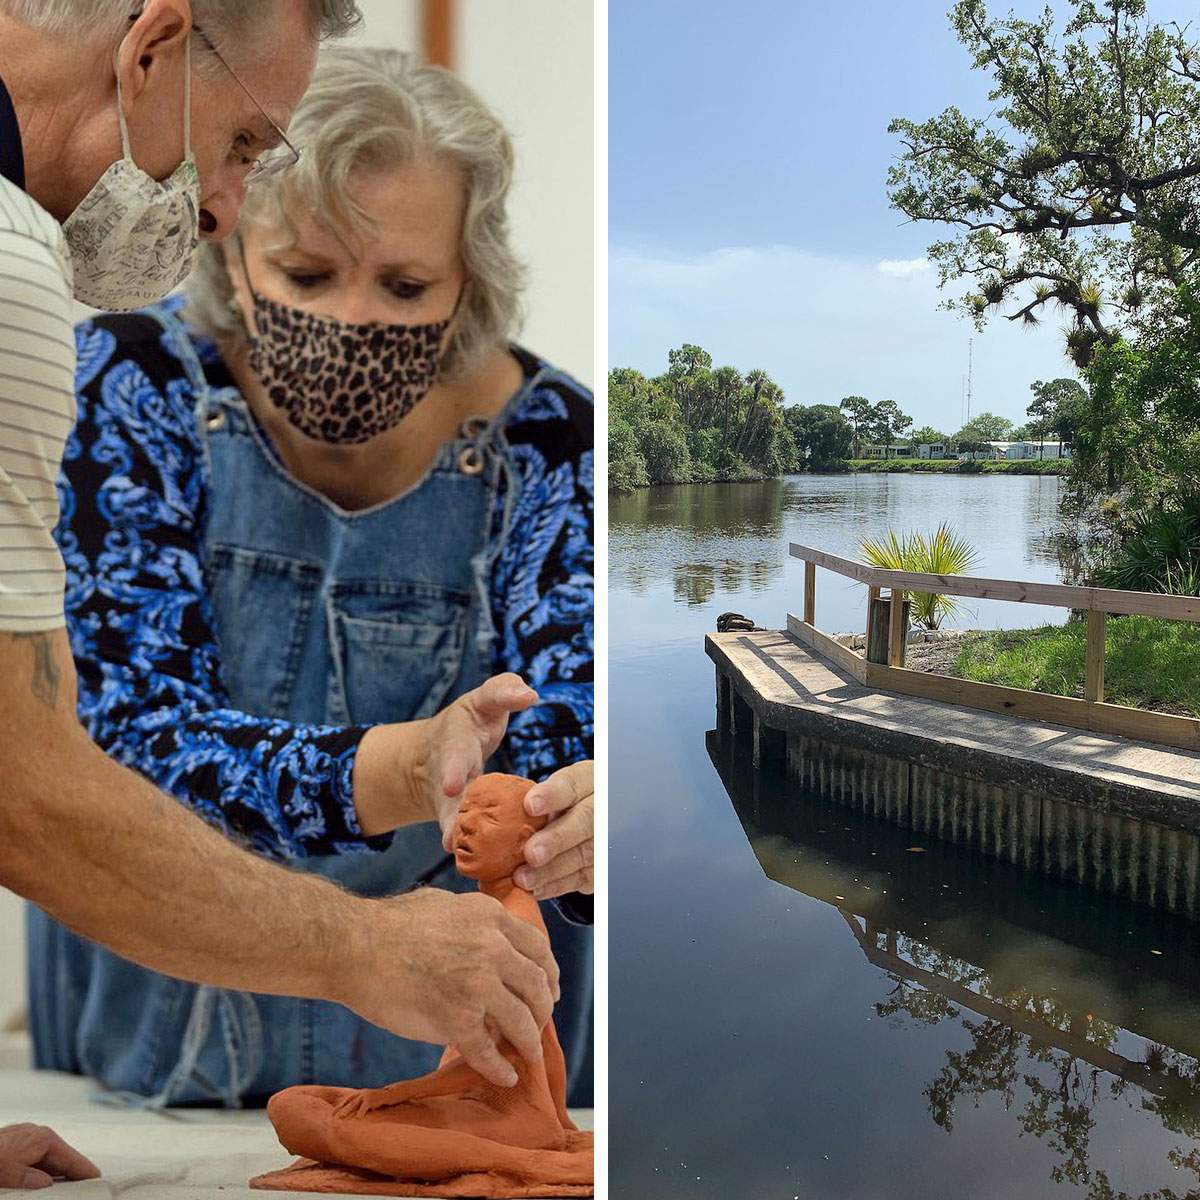 Two Images. 1. A couple wearing masks, working on a sculpture. 2. A pier next to a body of water with trees in the background.